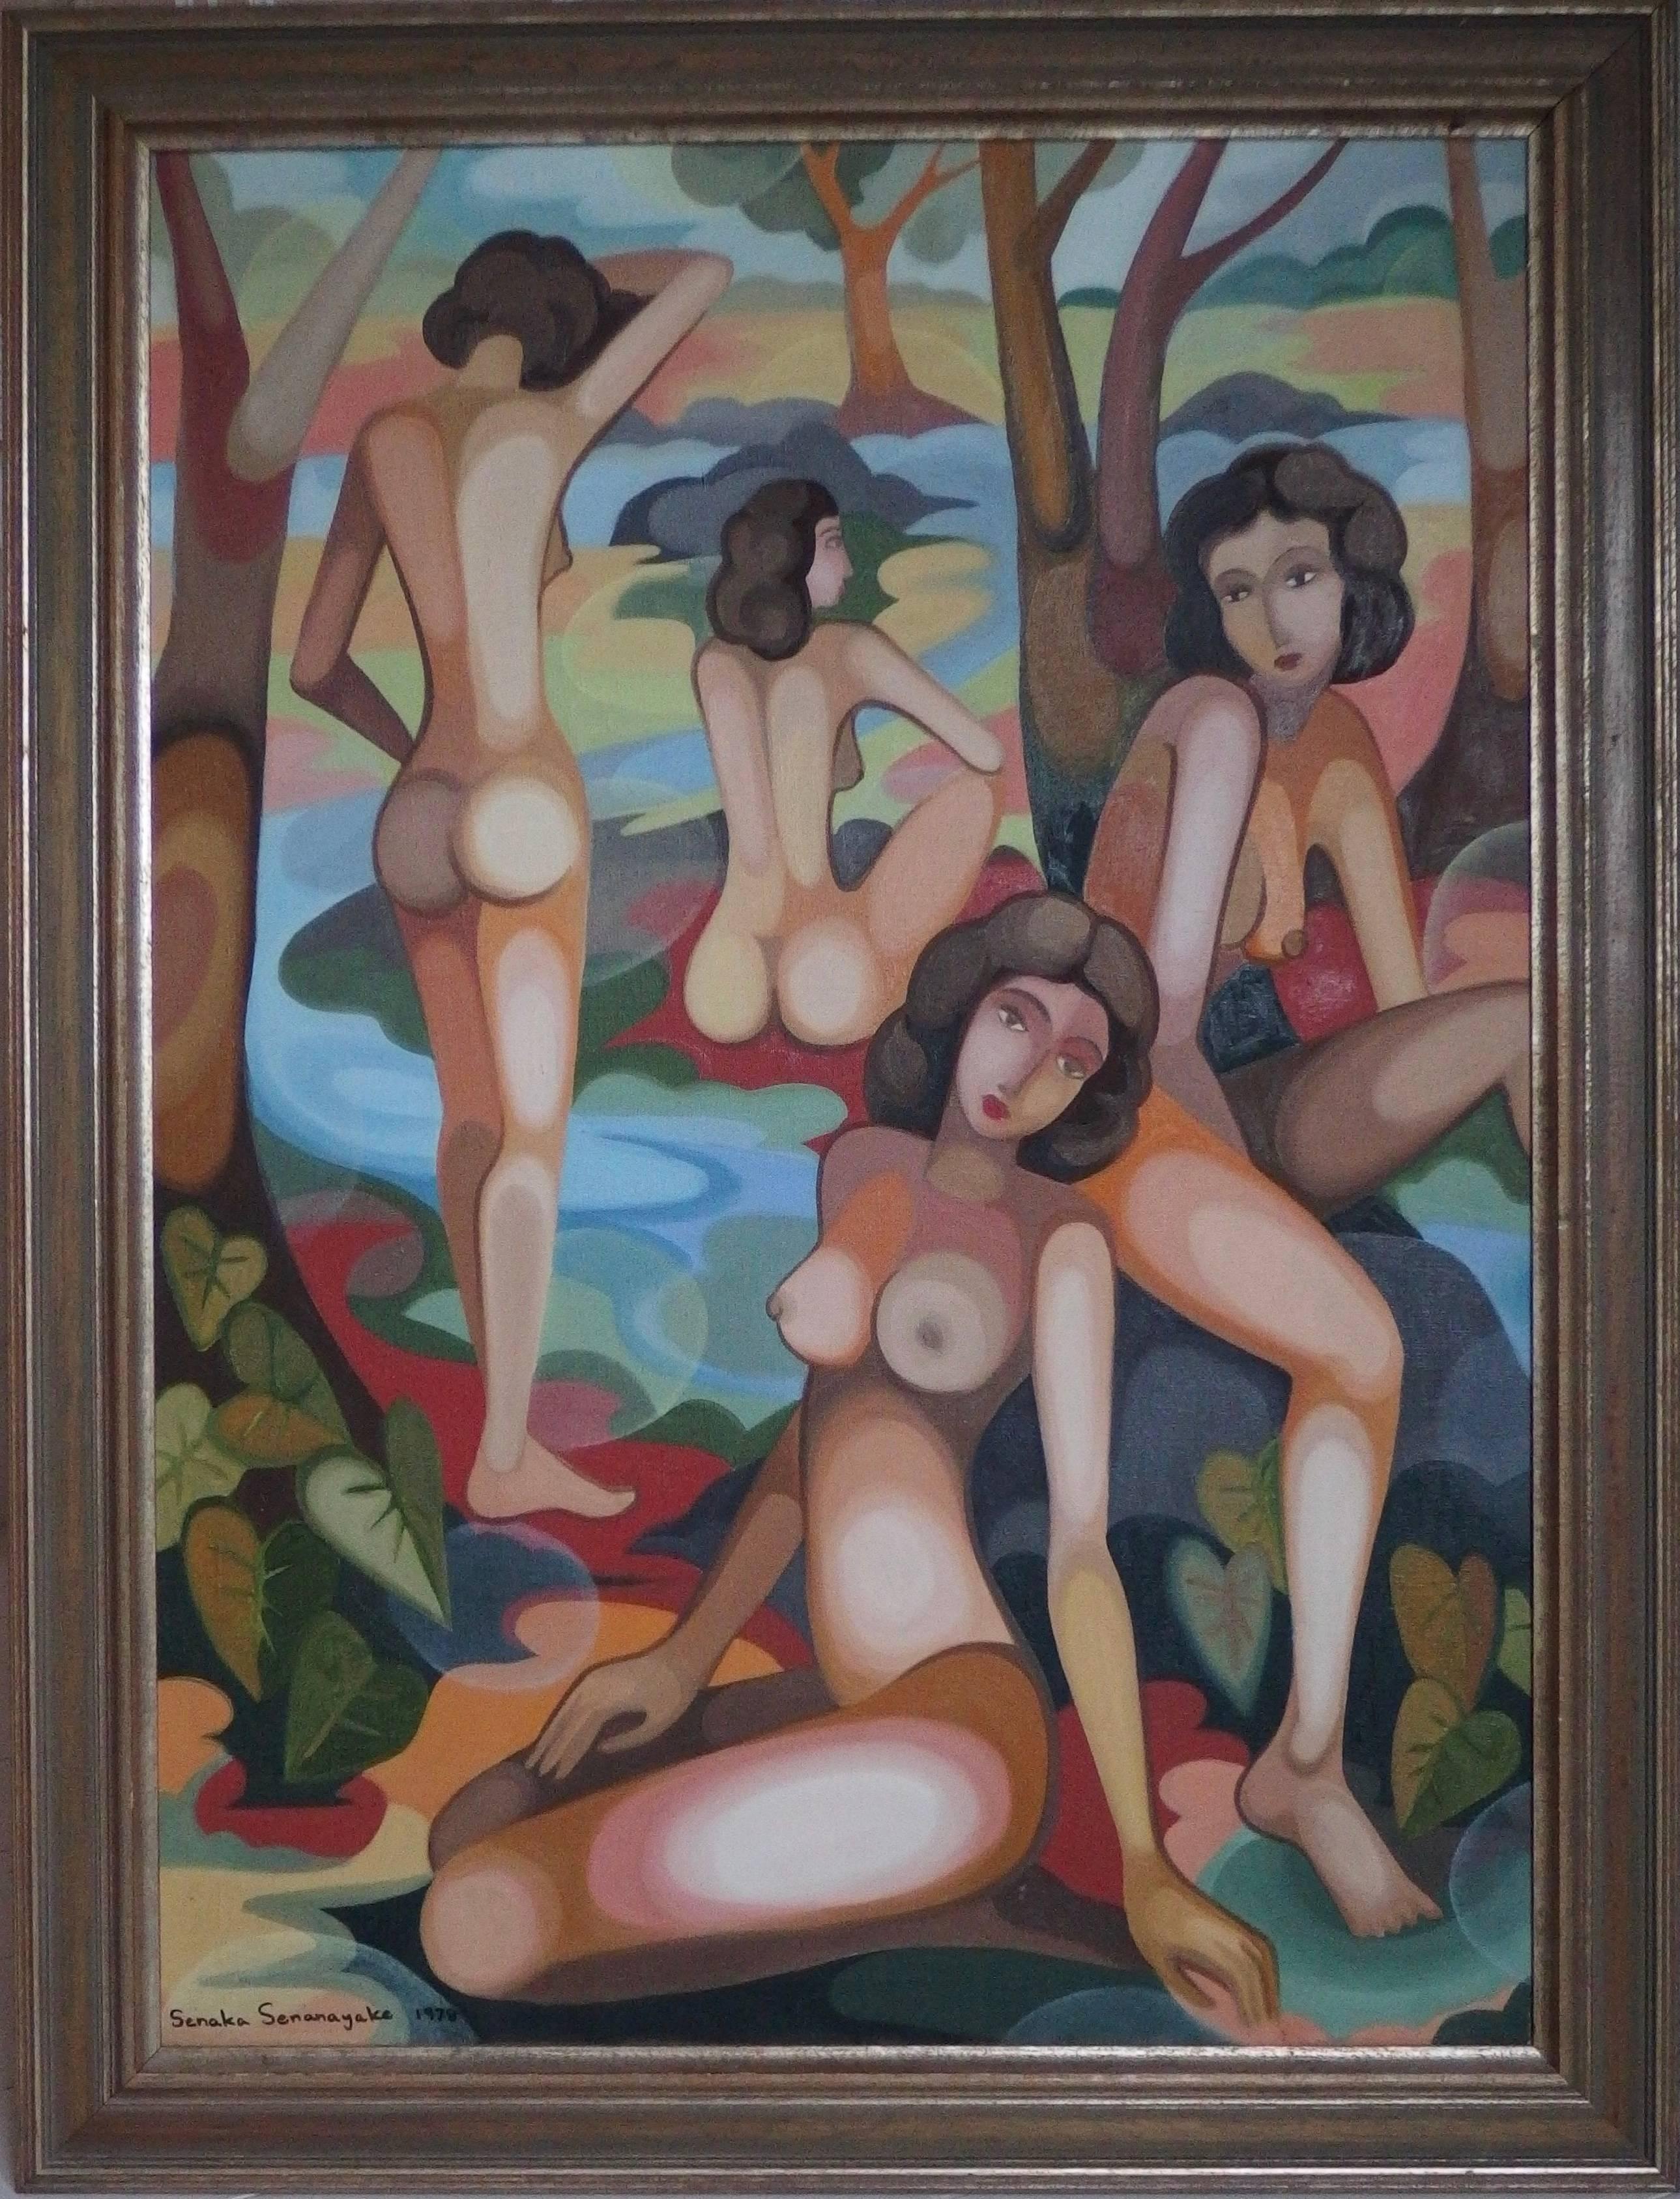 Oil on canvas painting signed and dated 1978 by the Sri Lankan artist Seneka Senanayake depicting bathing ladies.